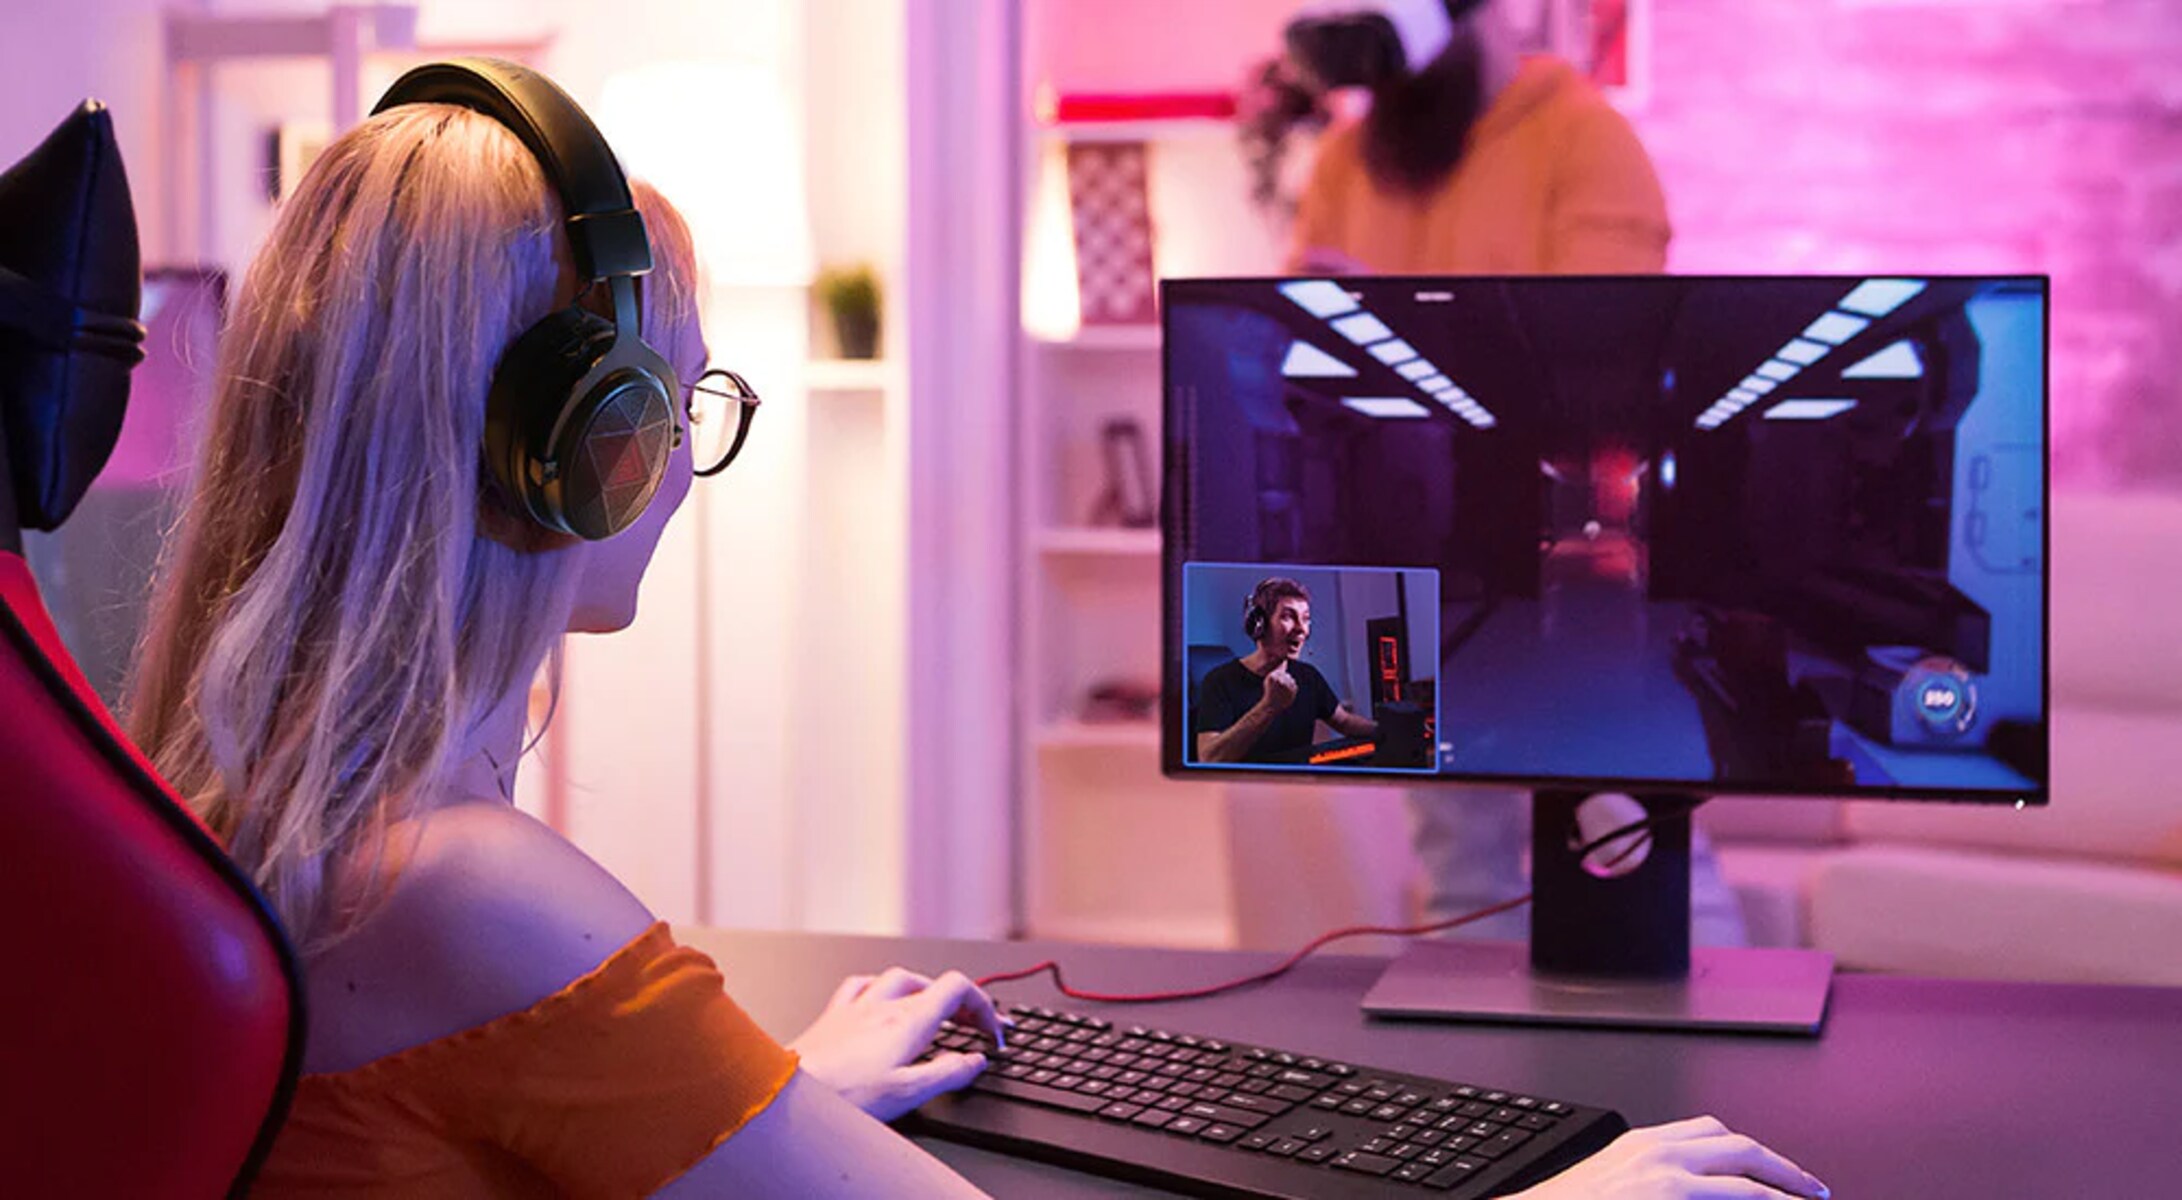 How To Set Up Gaming Headset On Windows 10